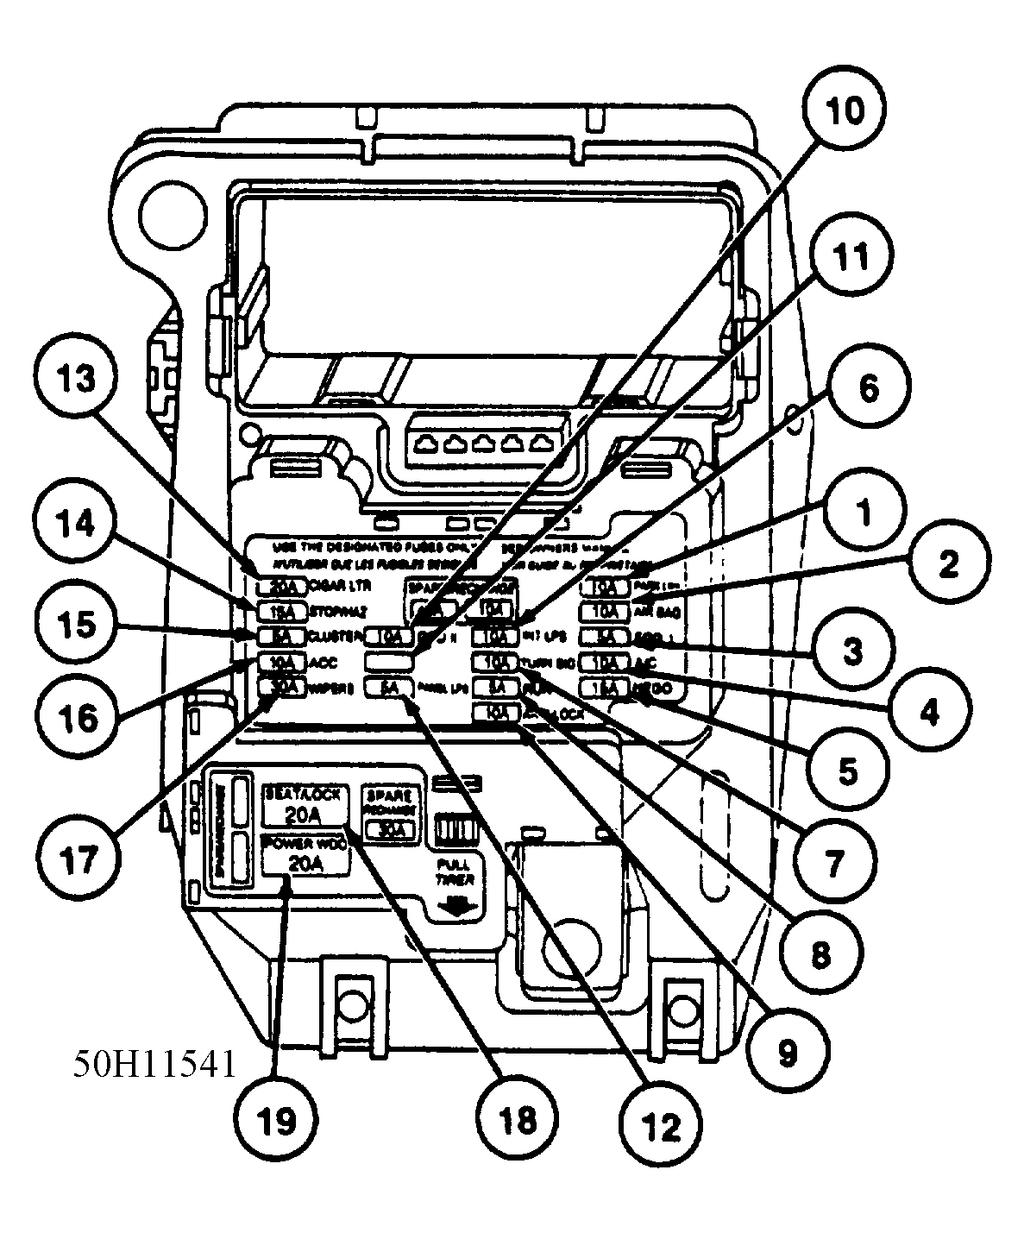 Fig. 4: Interior Fuse Panel Identification (1994-95 Models) Courtesy of FORD MOTOR CO.